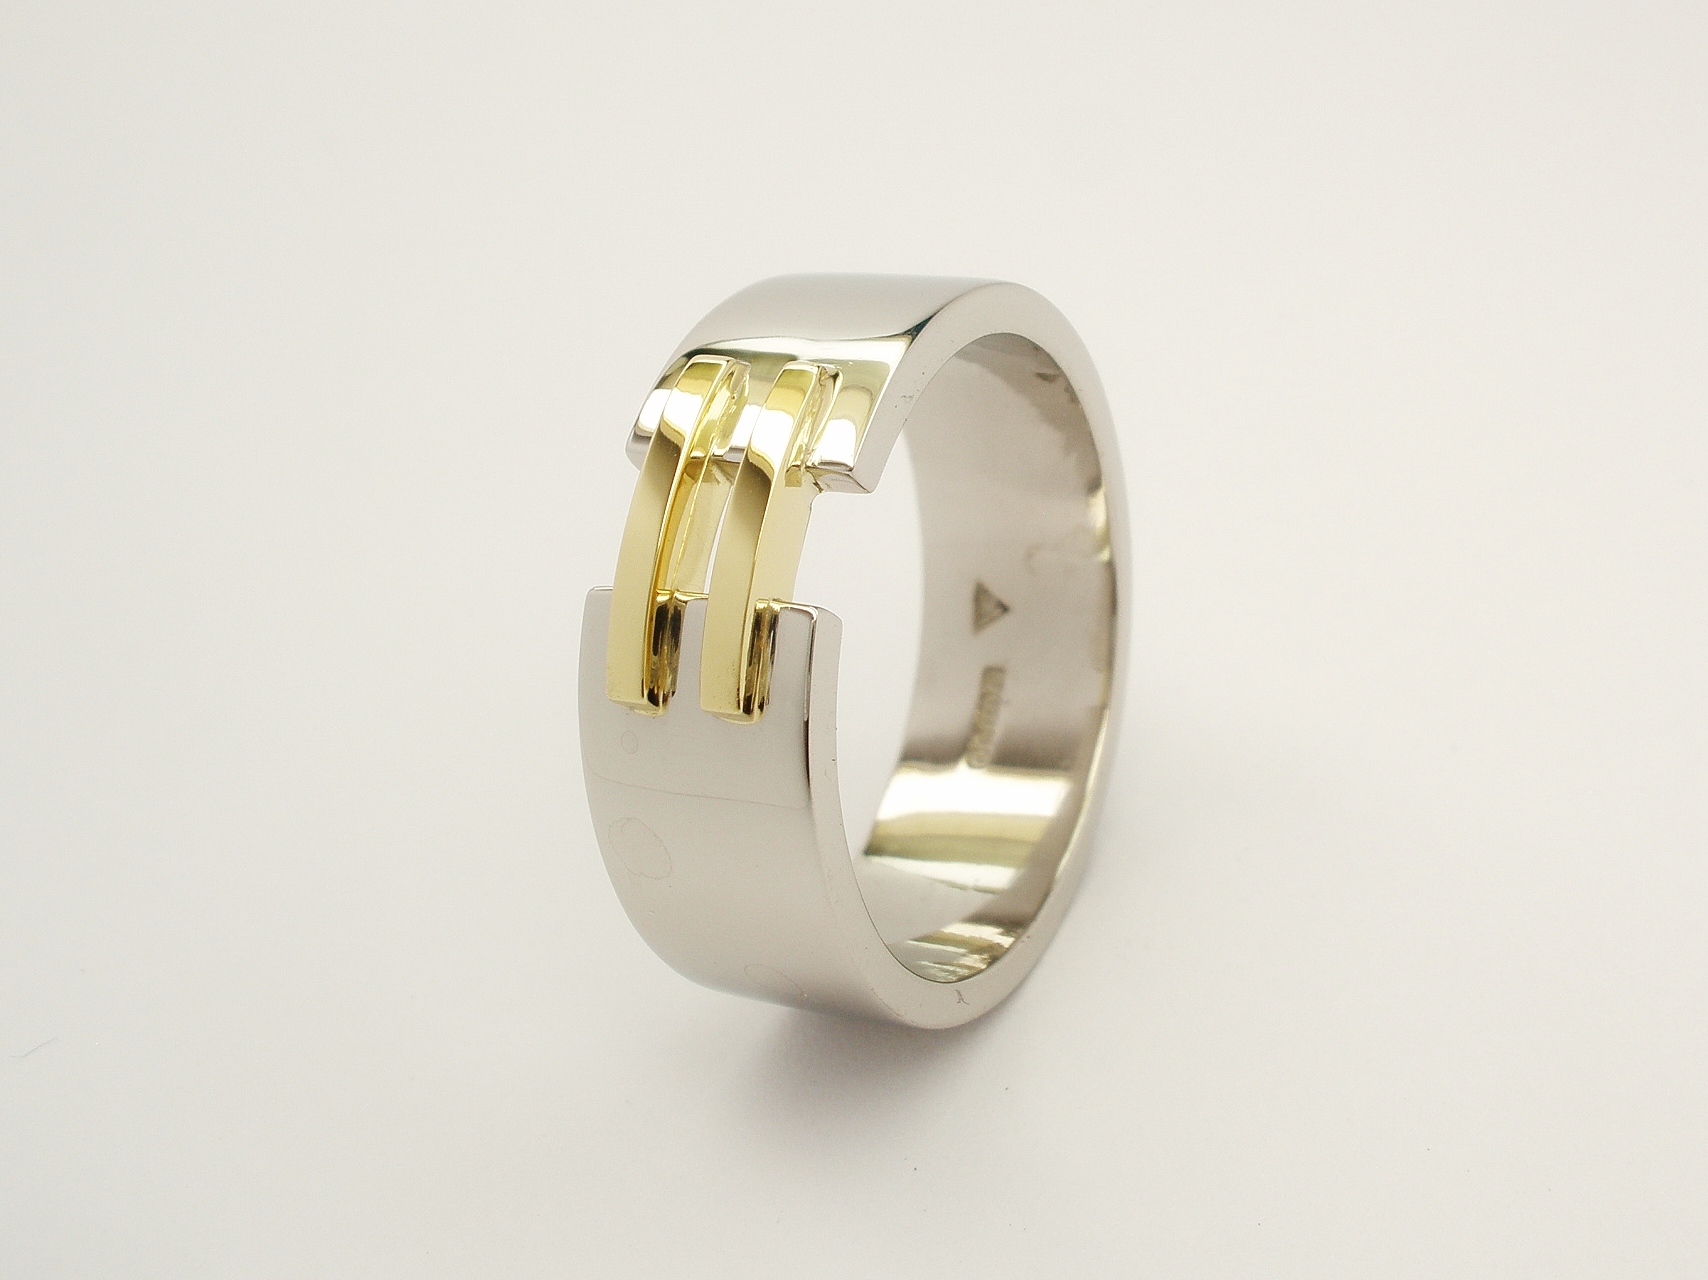 Gents palladium wedding ring with a pair of 18ct. yellow gold 'tram line' wires inlayed & bridging a gap across the top.